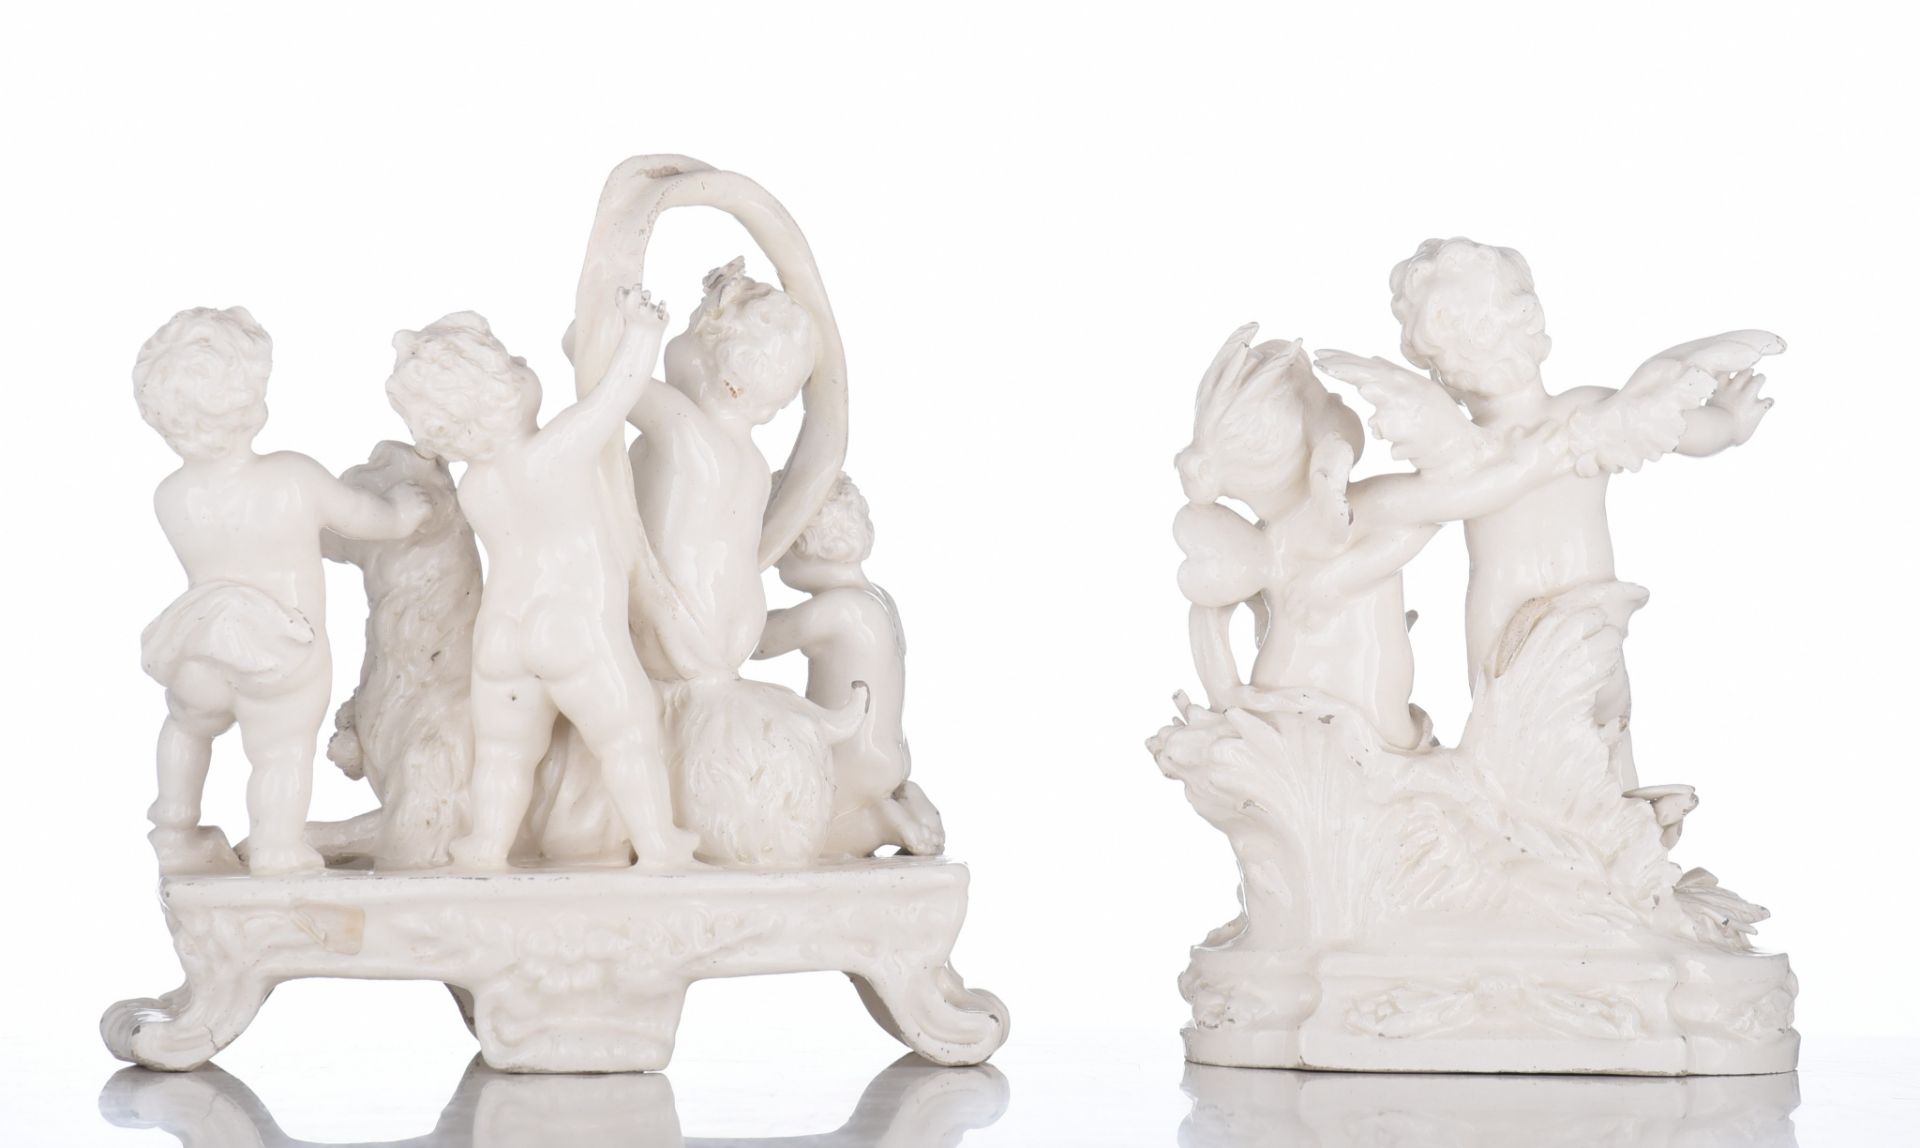 (BIDDING ONLY ON CARLOBONTE.BE) Two white glazed Capodimonte figural groups, Naples, H 20 - 23 cm - Image 4 of 16